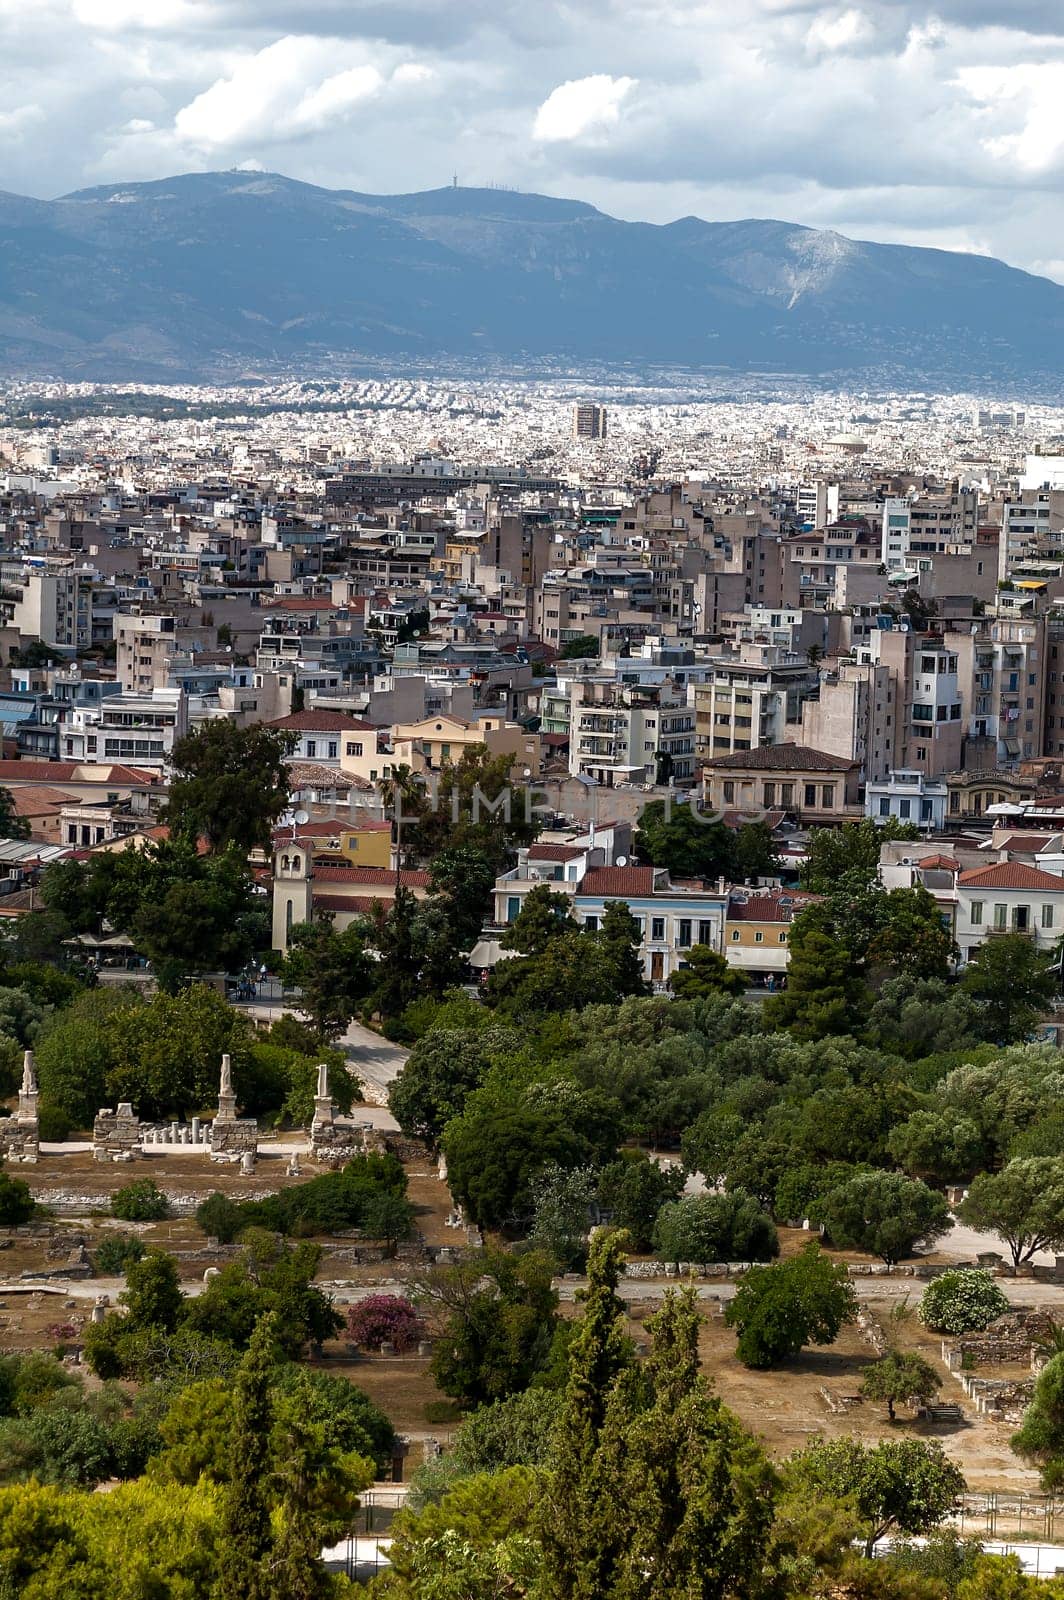 Panoramic view of the city of Athens, Greece